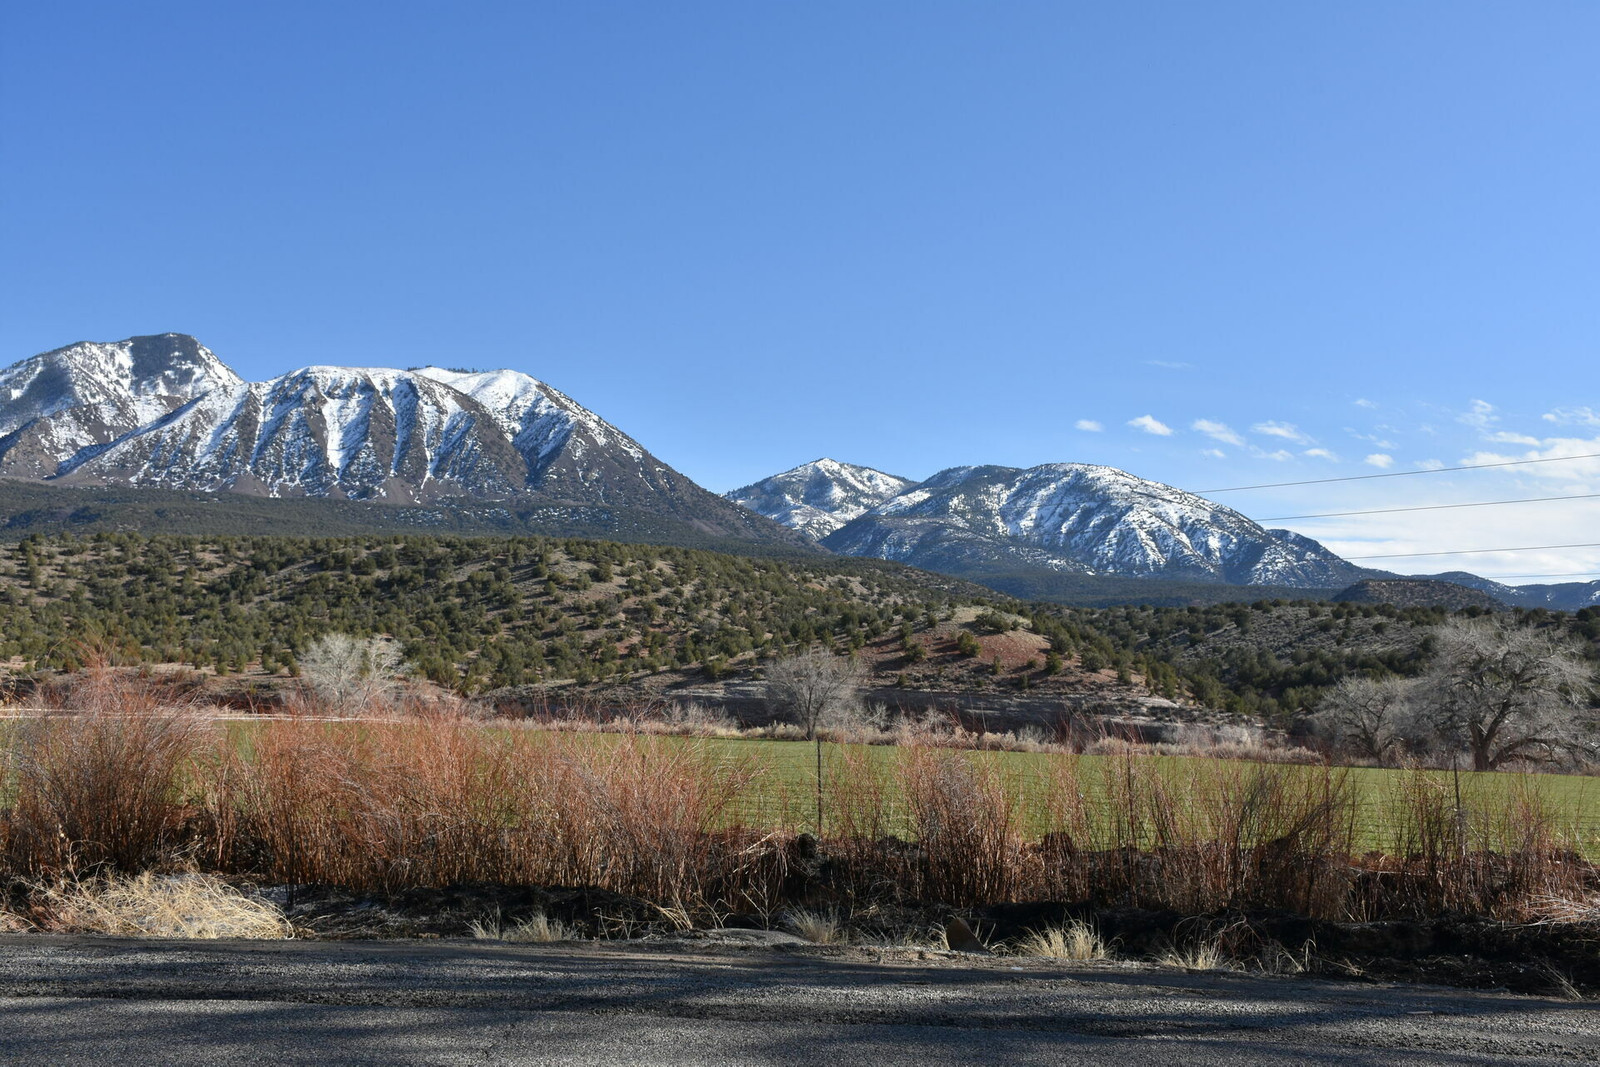 A field with snow-capped mountains in the background.